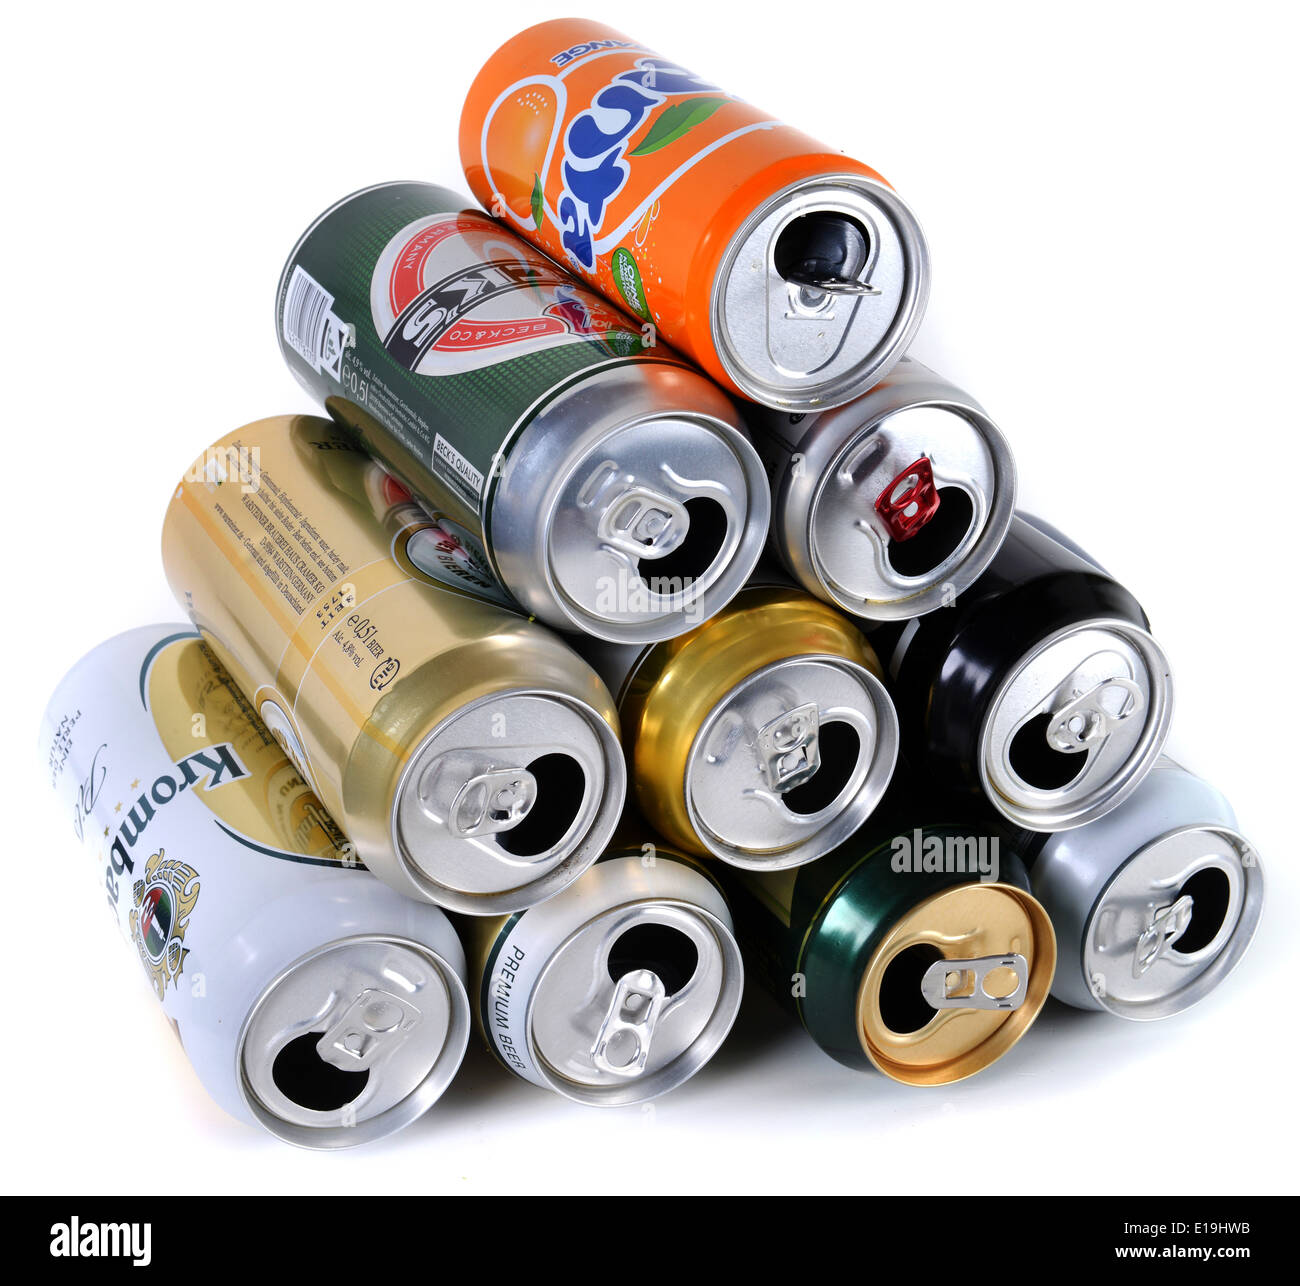 empty cans, can Stock Photo